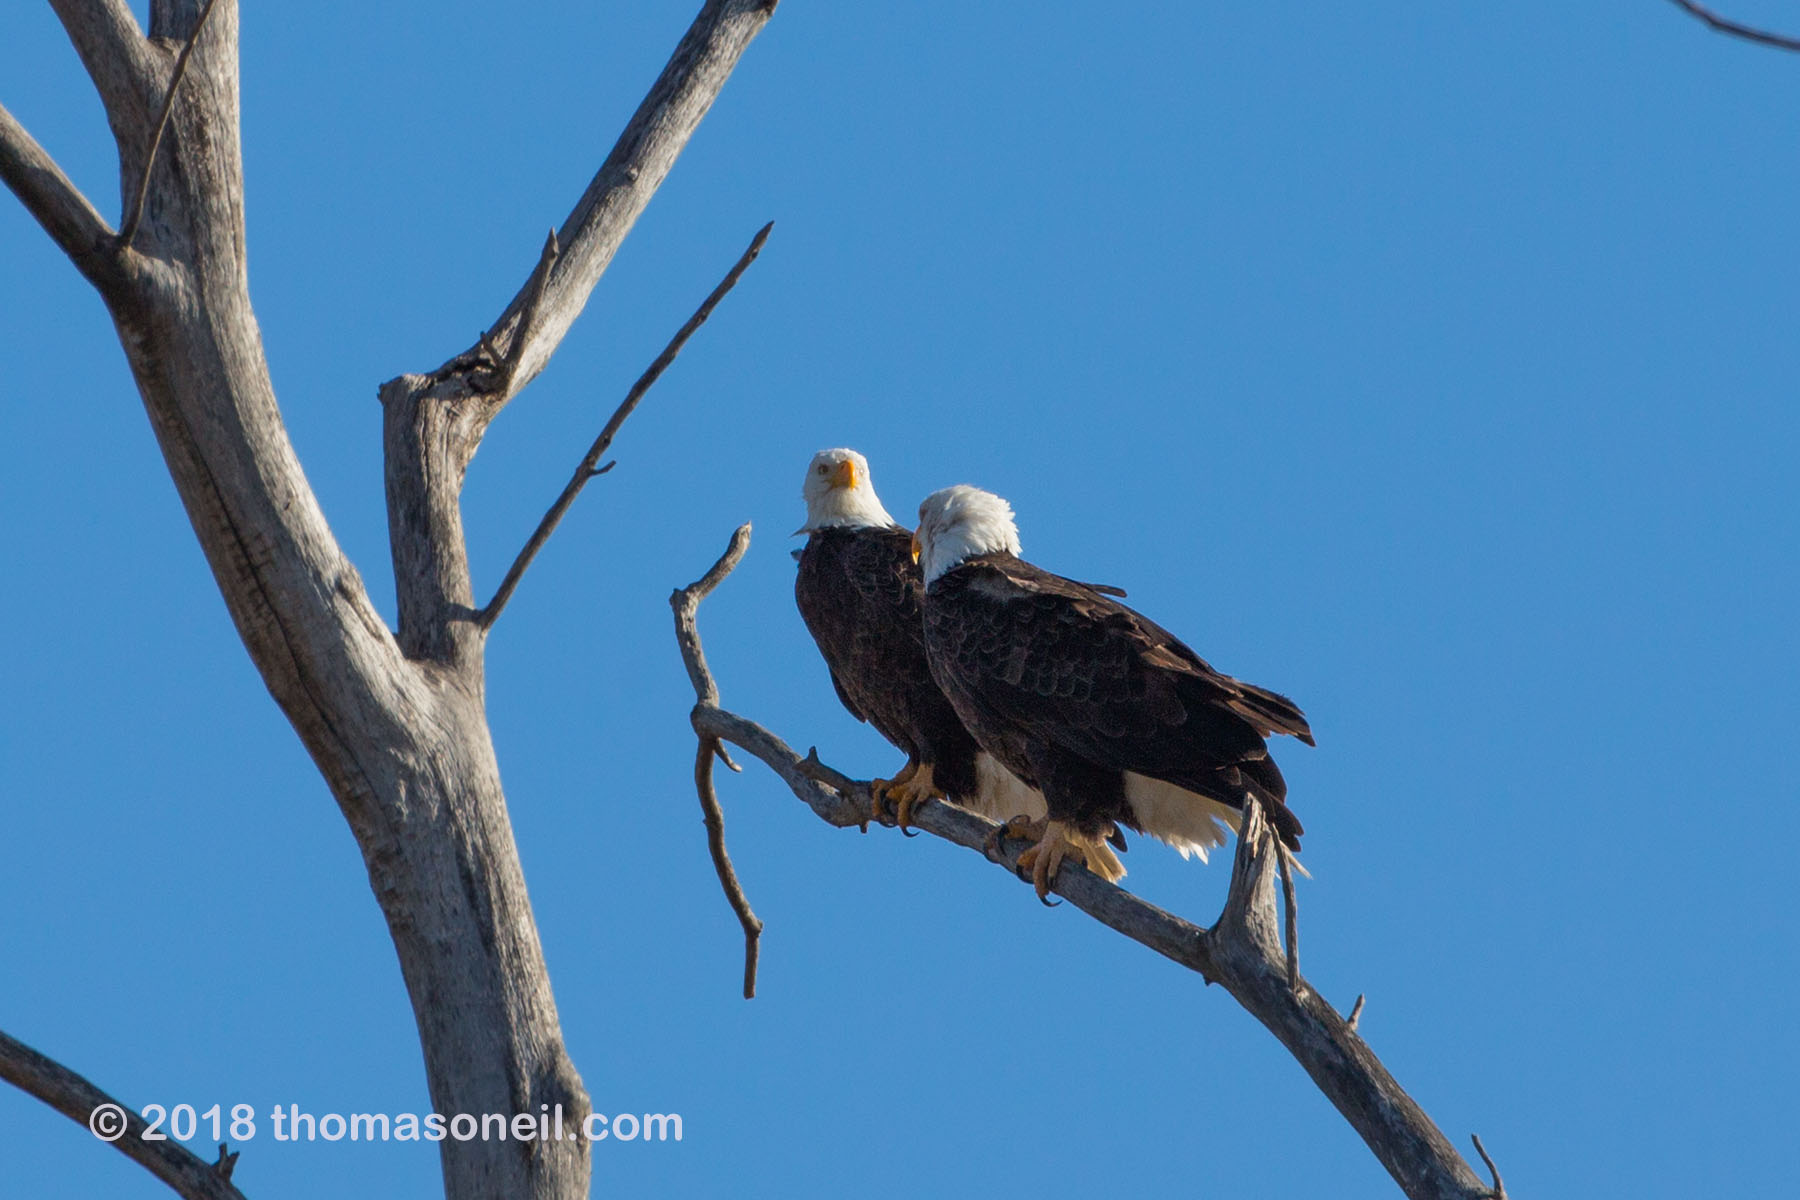 Bald eagles taking a break from nest building, Loess Bluffs National Wildlife Refuge, Missouri.  Click for next photo.